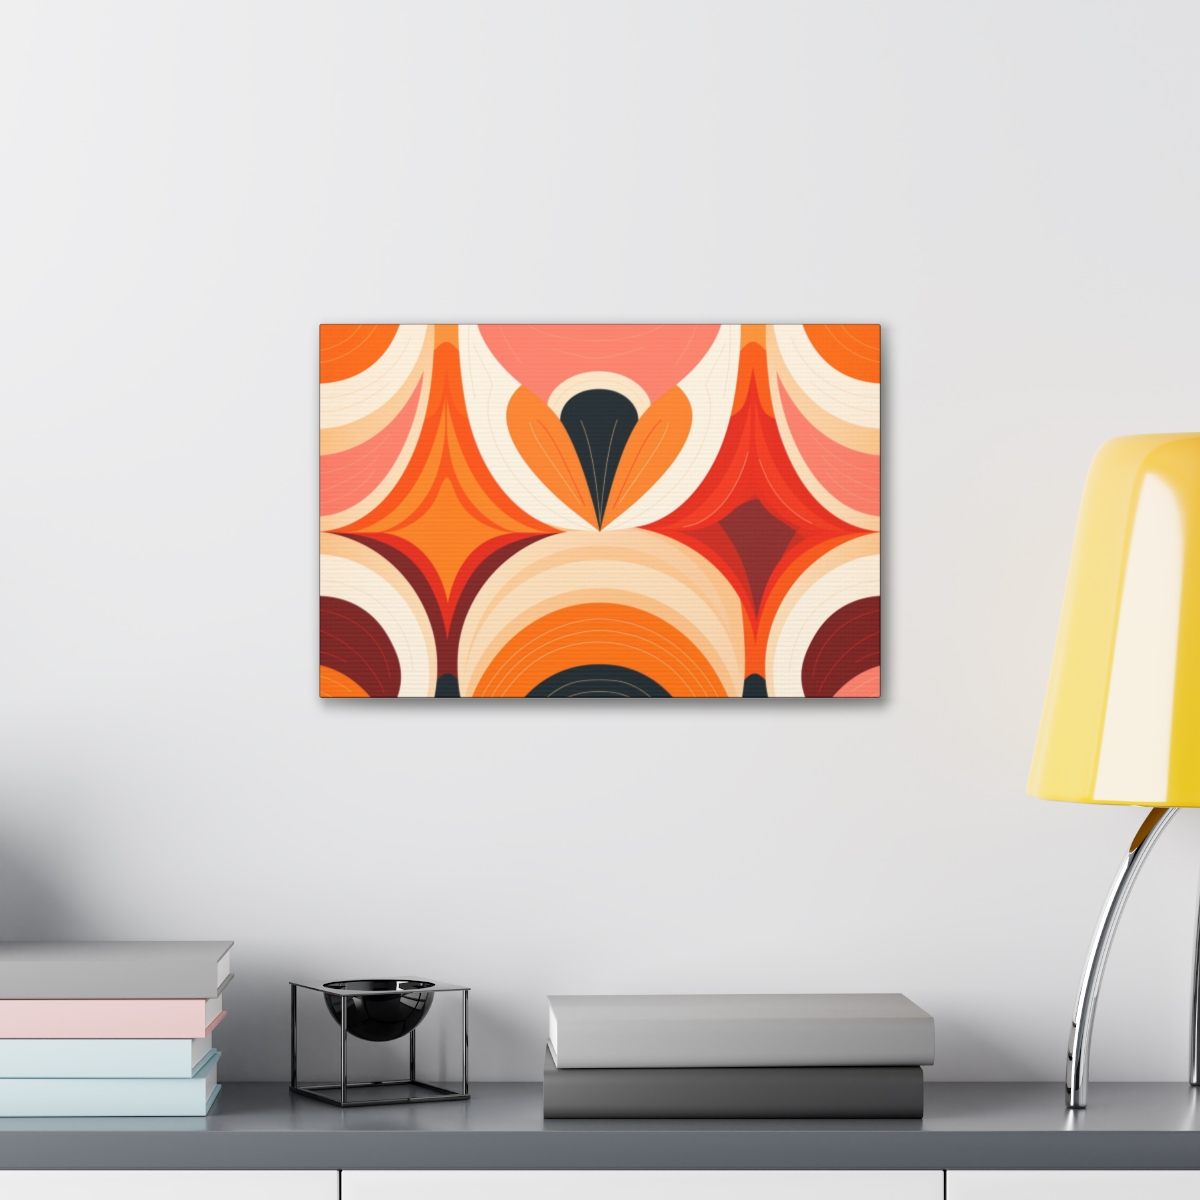 Abstract Geometric Art Canvas Print: A Slice of Reality